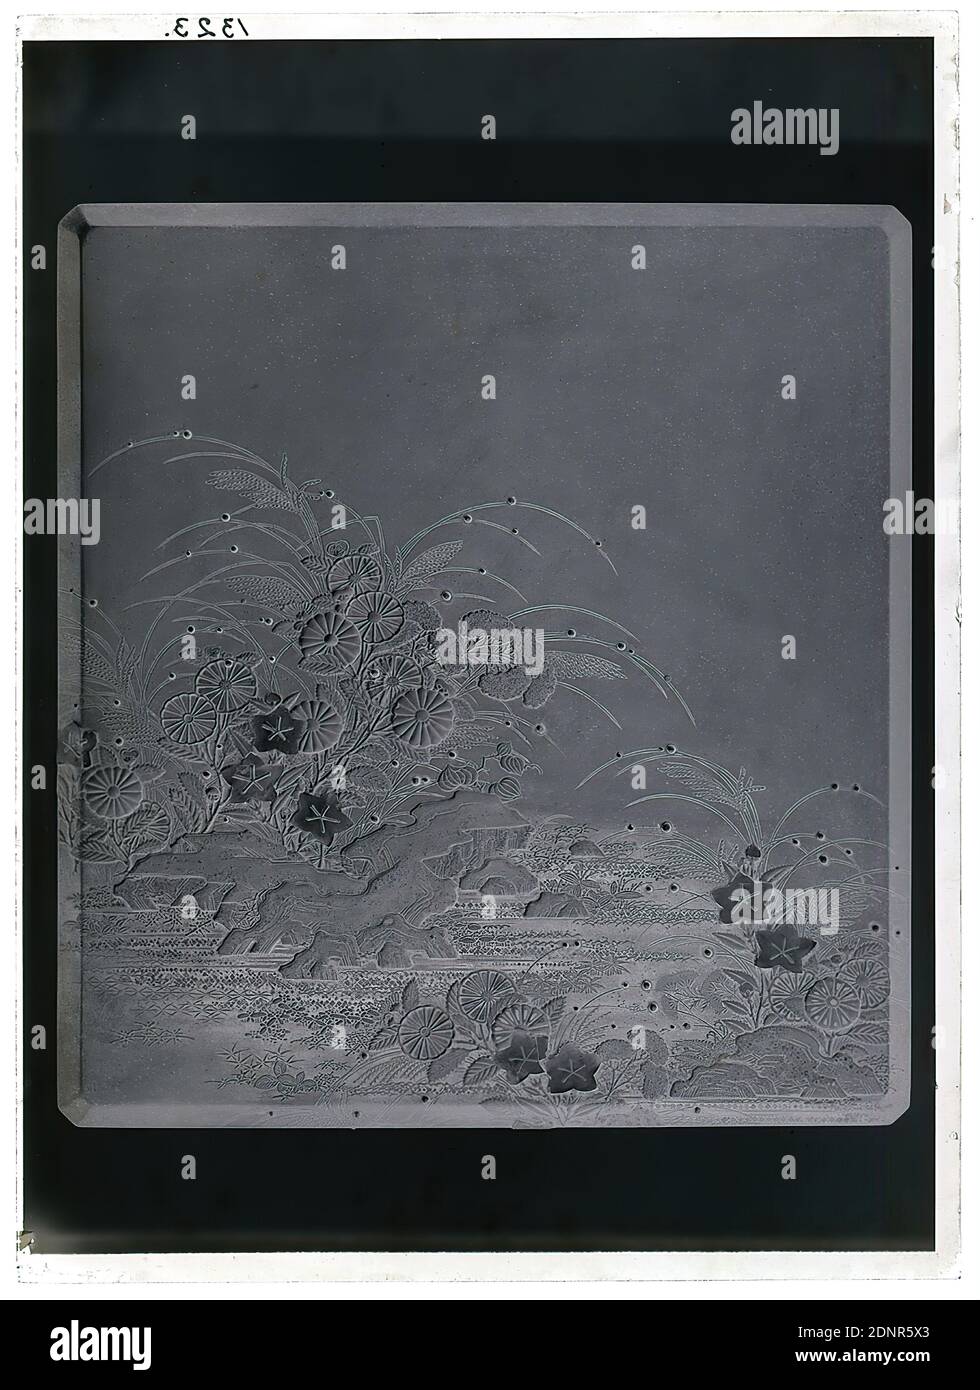 Wilhelm Weimar, Japanese lacquer work, glass negative, black and white negative process, total: height: 23.8 cm; width: 17.8 cm, numbered: top left : in black ink: 1323, photography, flower ornaments, trees, shrubs, work of applied art (lacquer Stock Photo